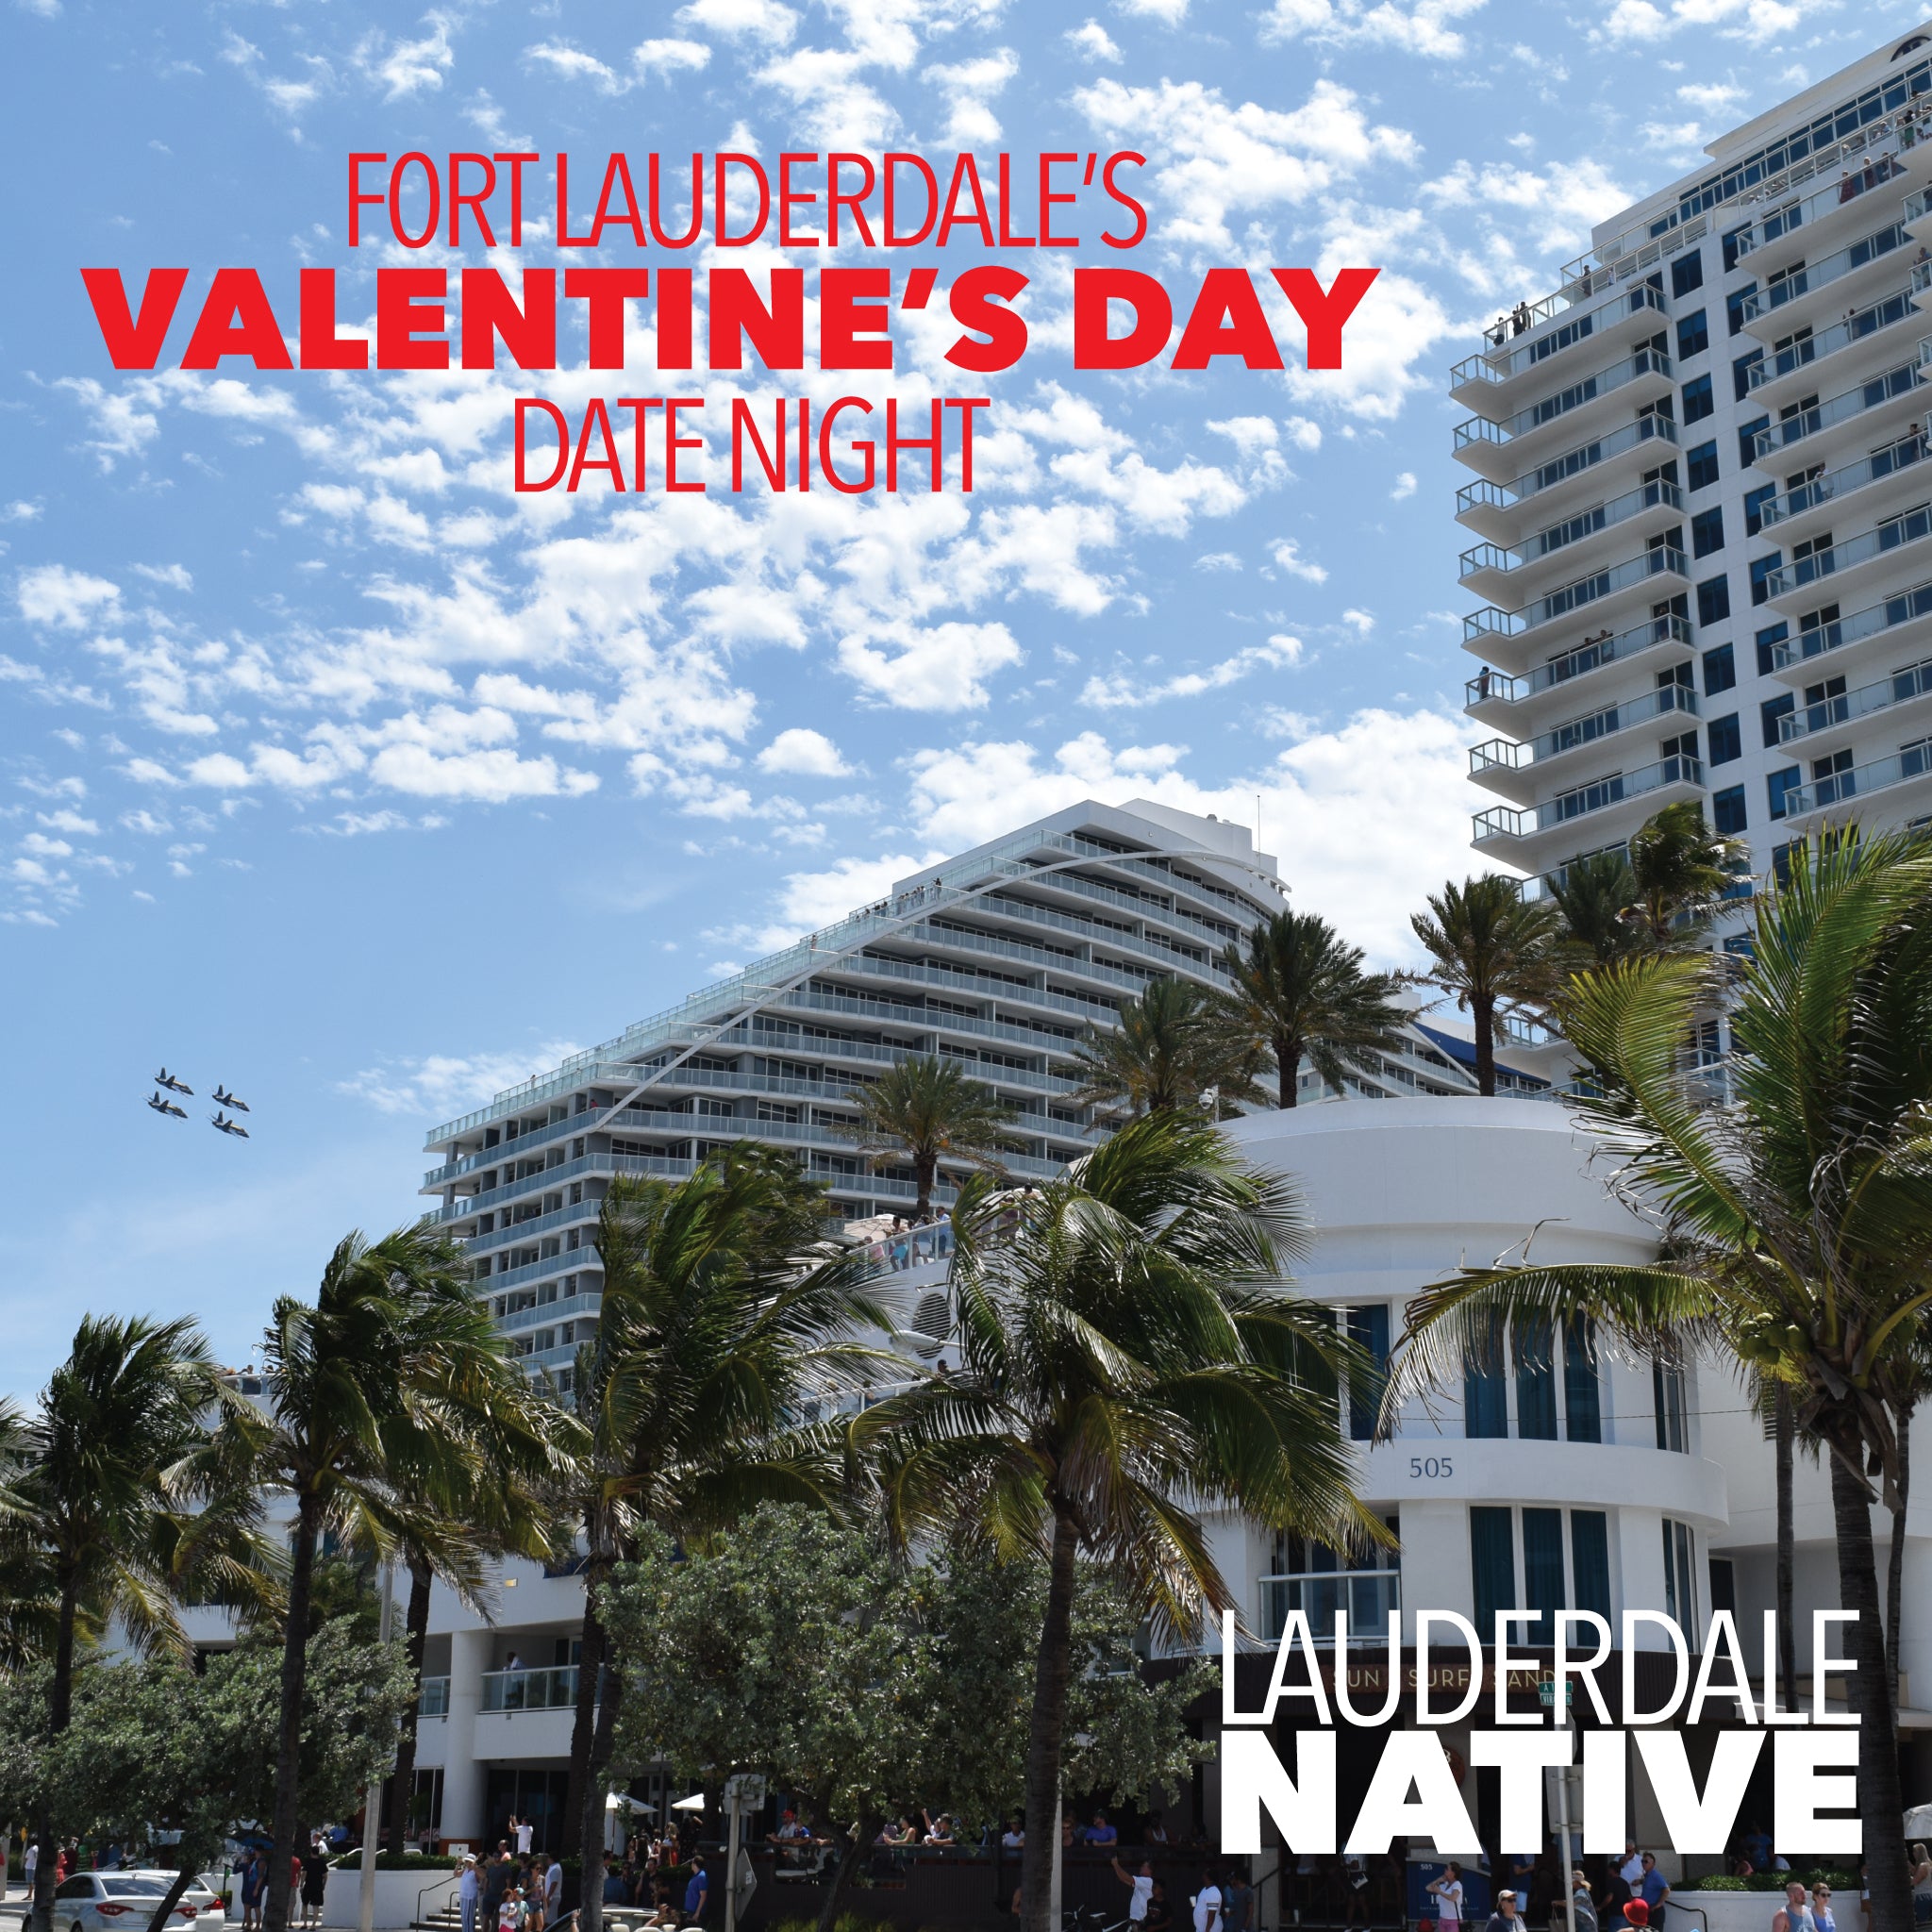 Top 10 Fort Lauderdale Restaurants and Events for Valentine's Day